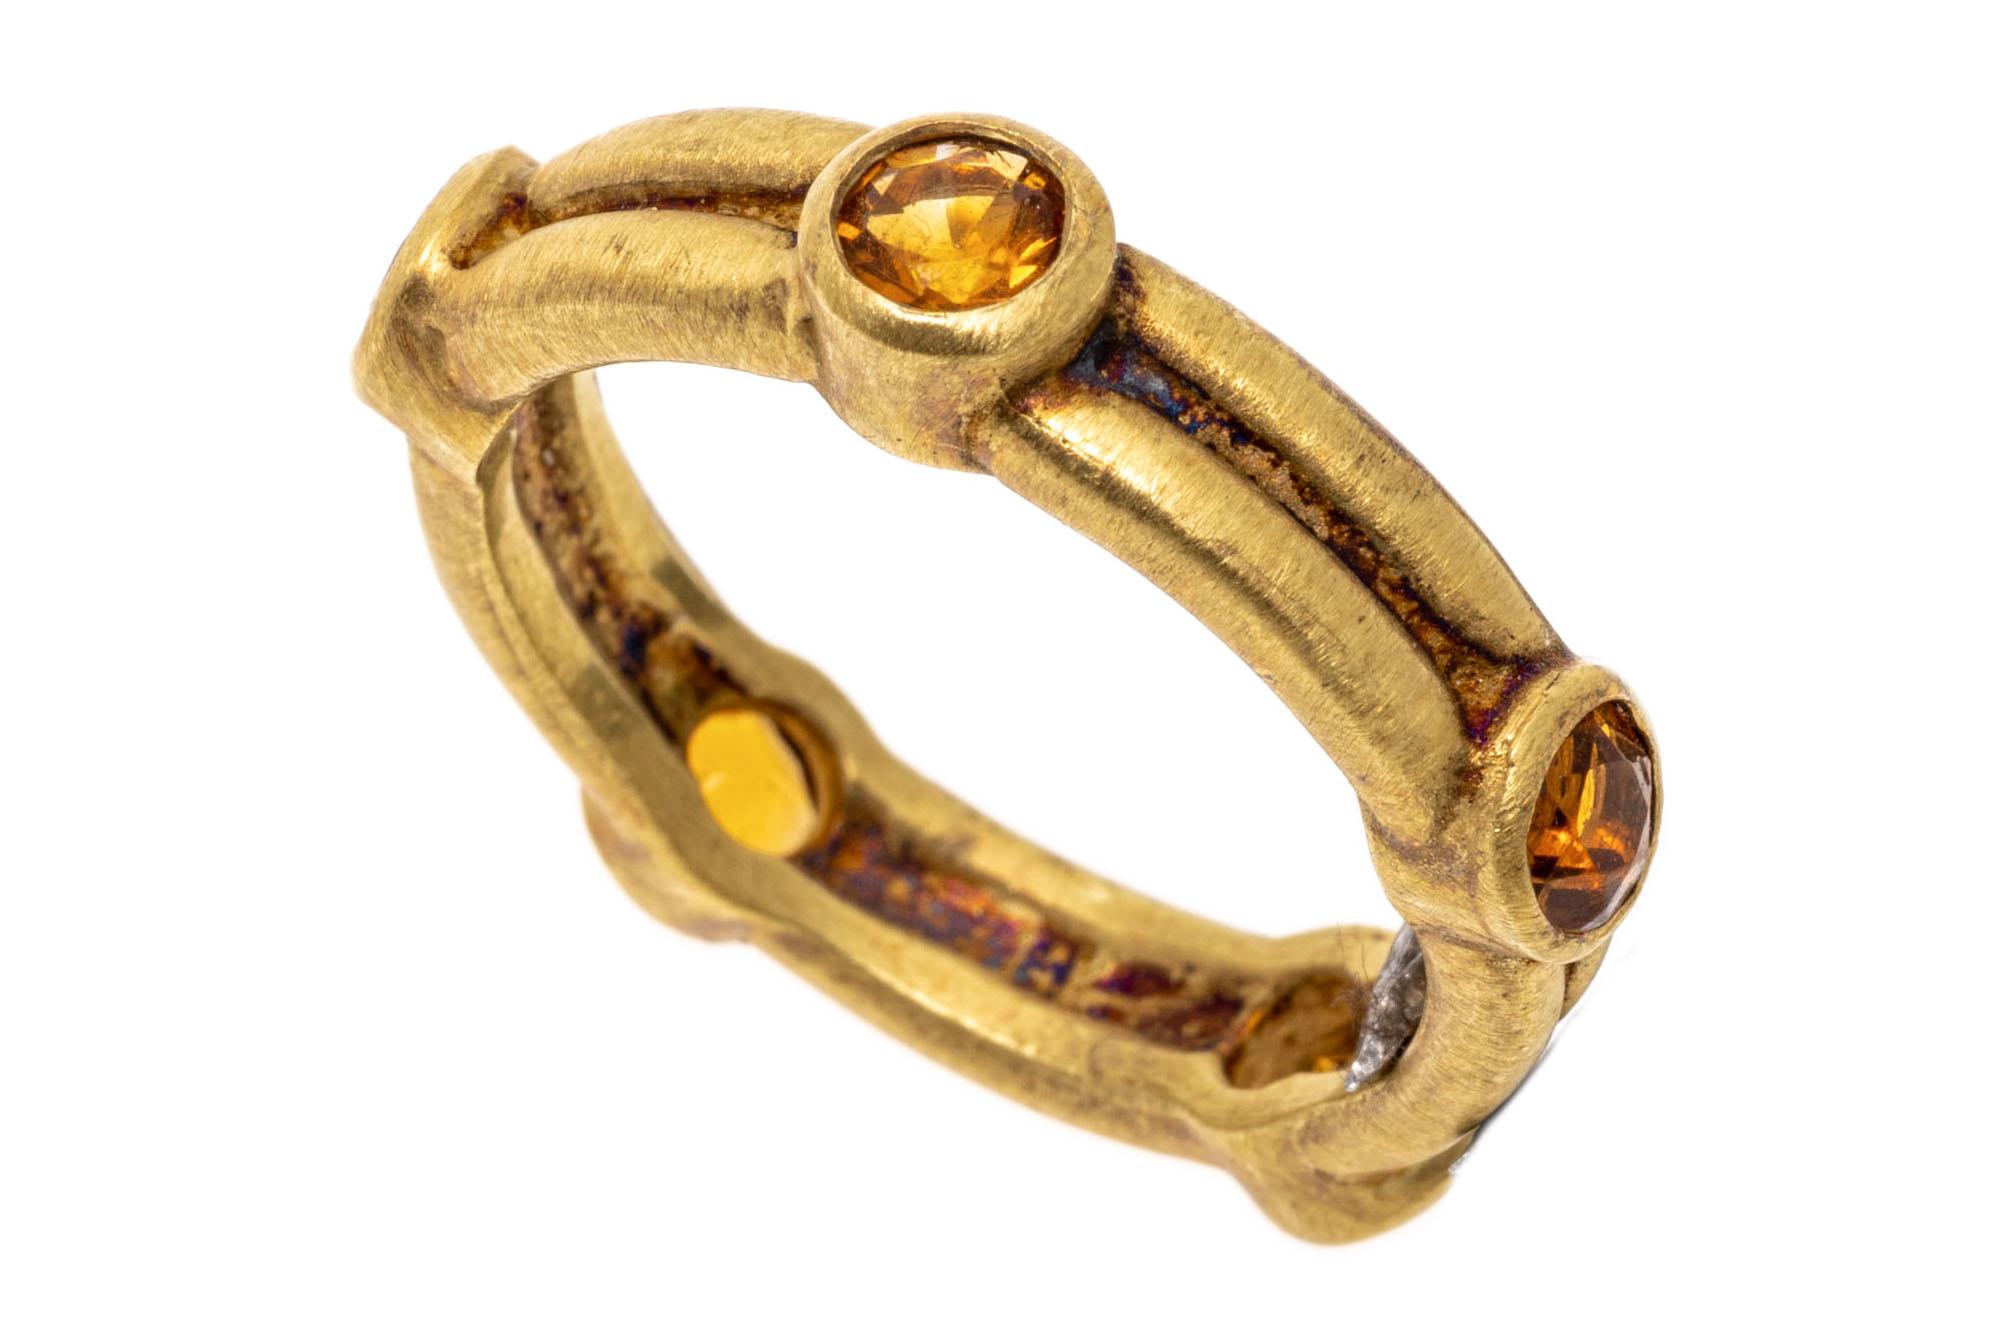 medieval ring found in england